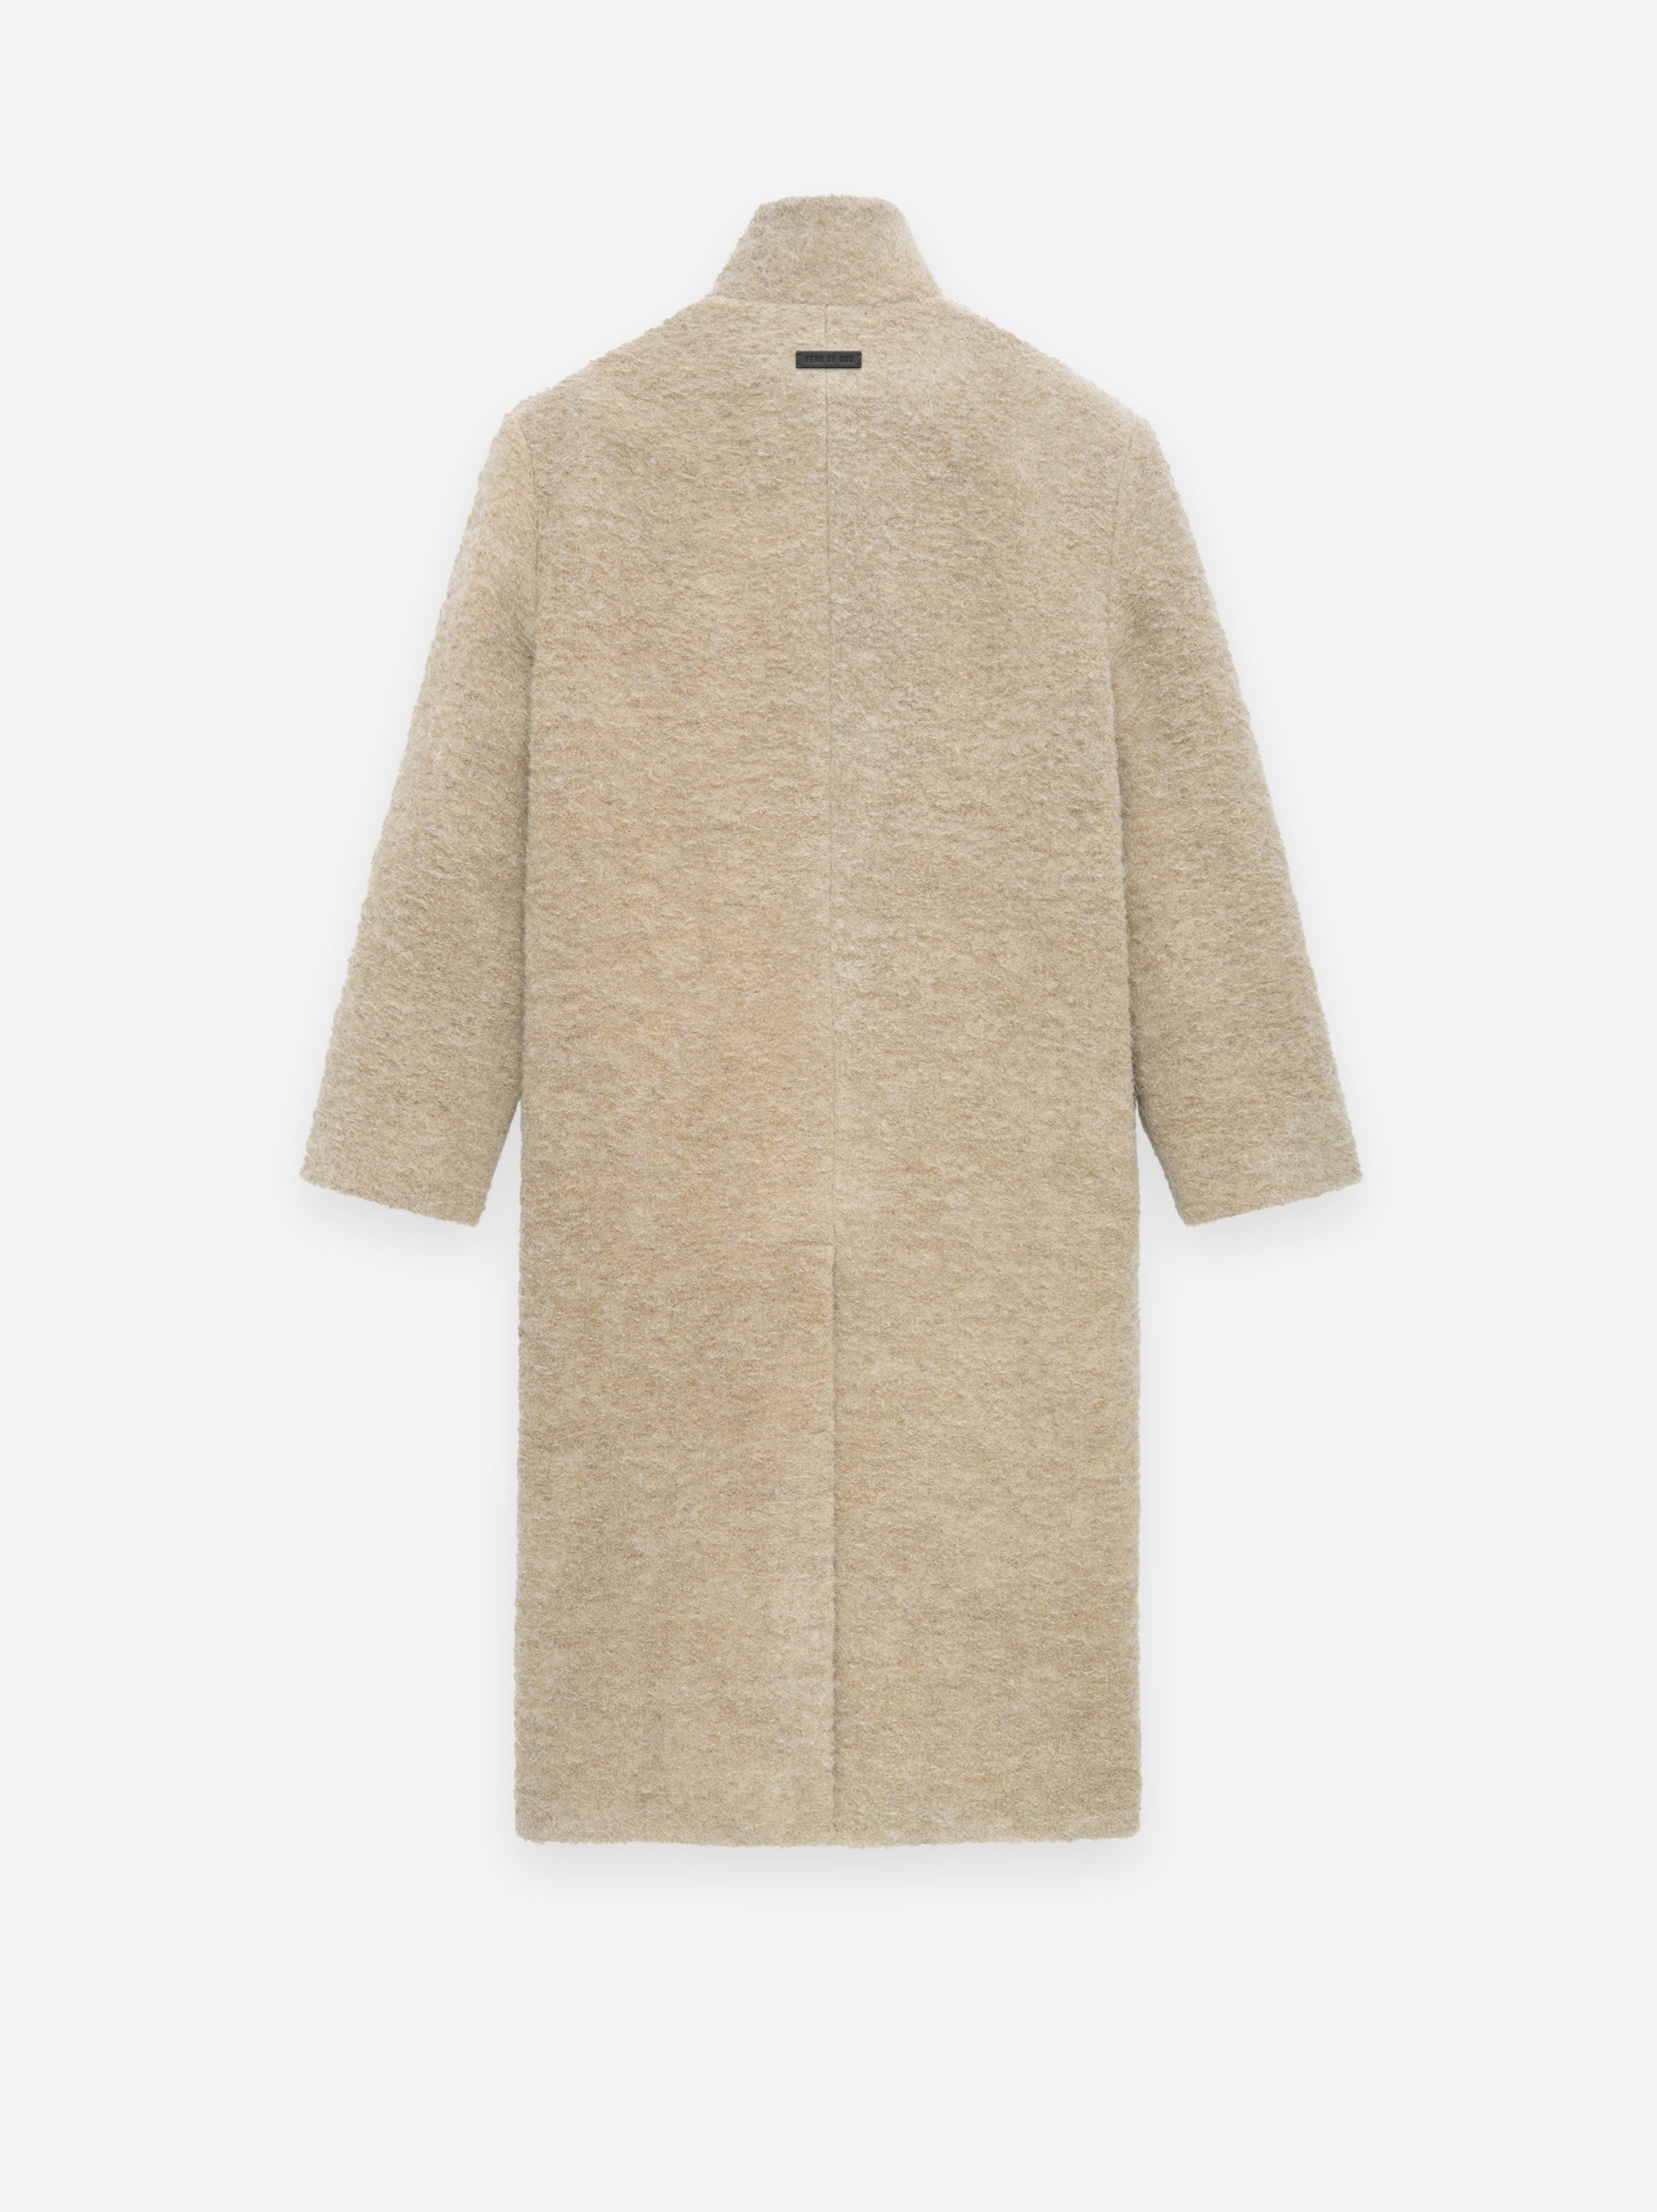 Wool Boucle Stand Collar Overcoat | Fear of God